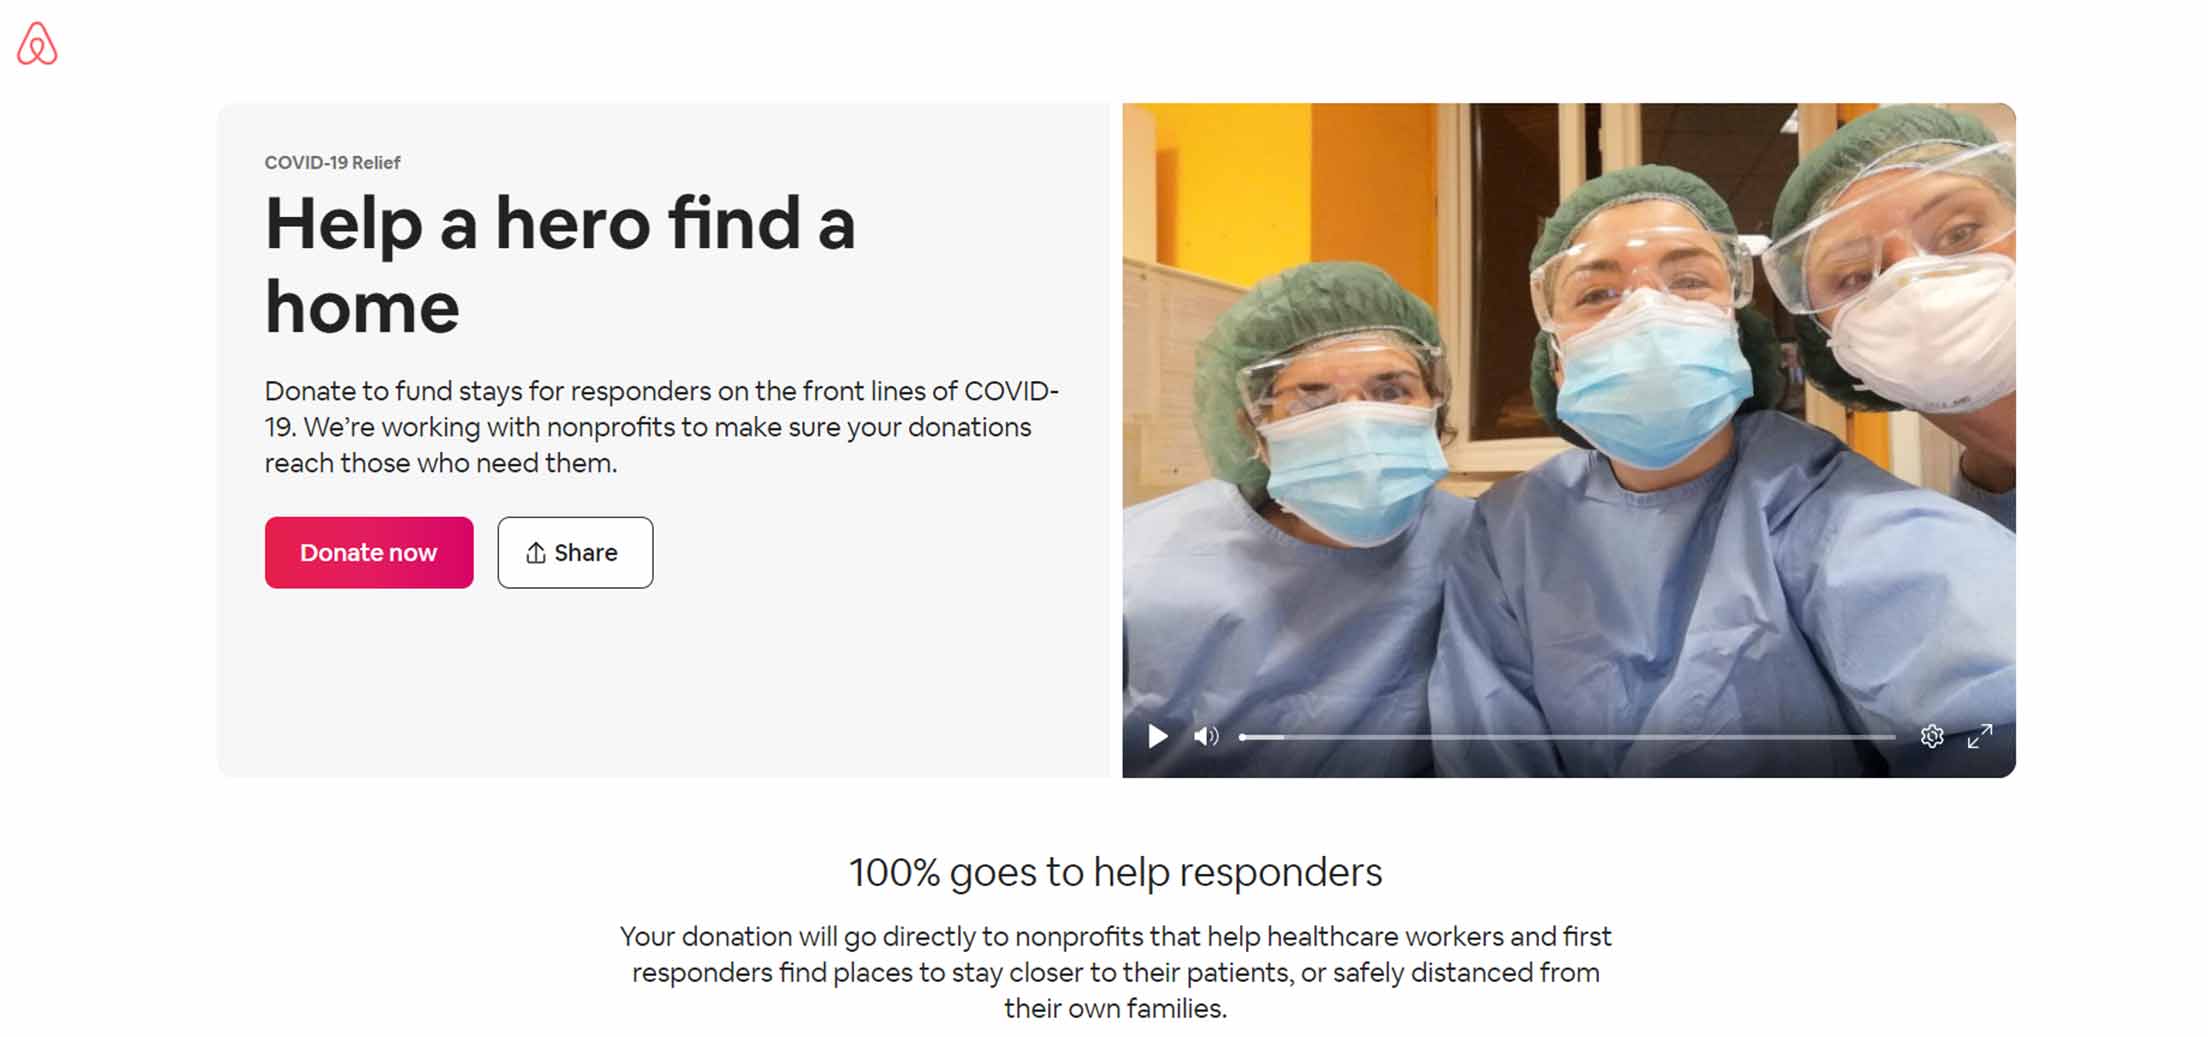 AirBnB’s Help a Hero webpage with a photo of 3 frontline healthcare workers and a button for users to donate or share the story.